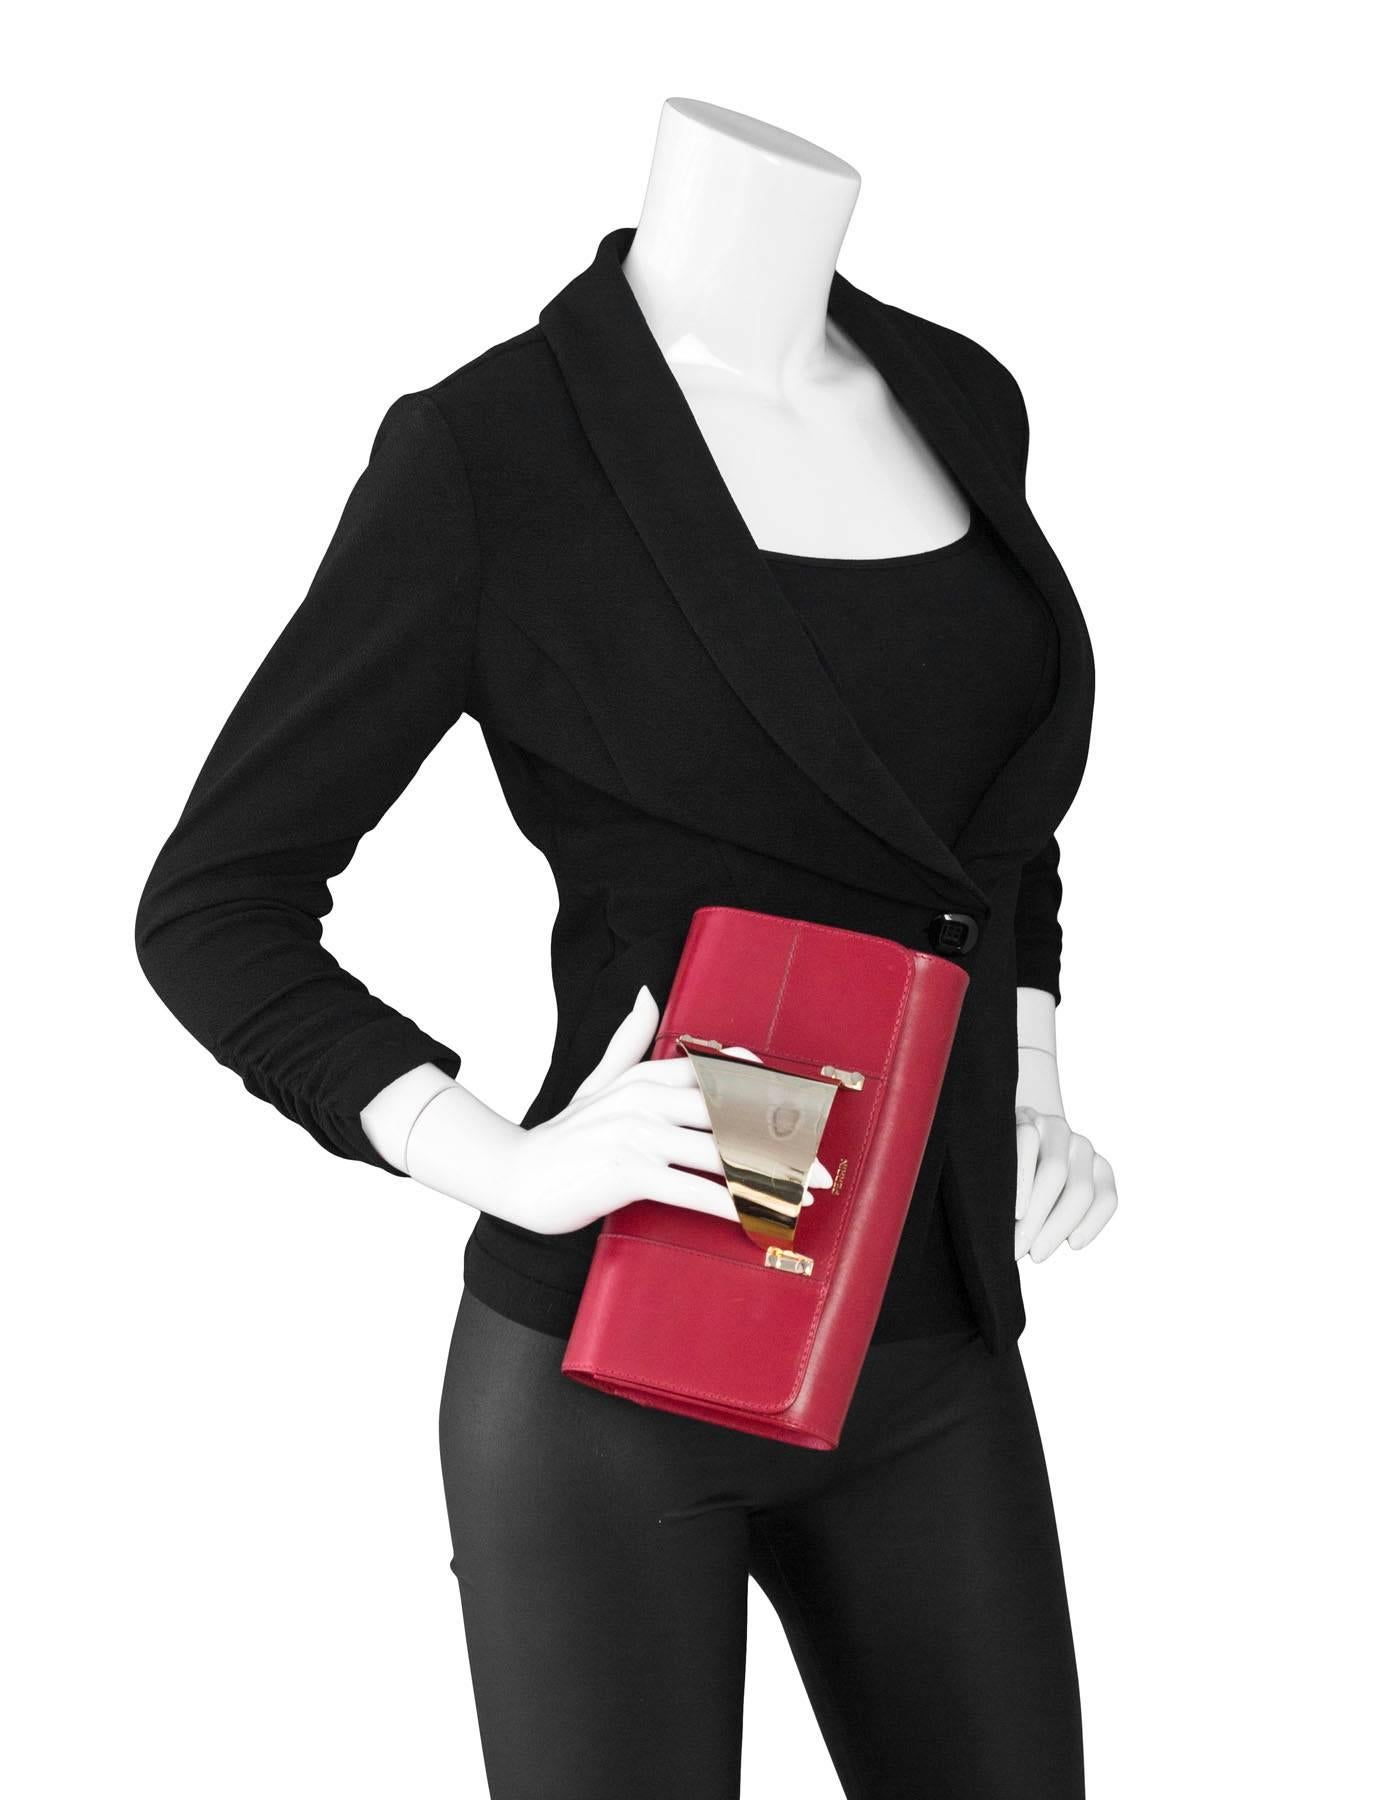 Perrin Red Leather L'Eiffel Glove Clutch
To be worn with right hand

Color: Red, gold
Materials: Leather, metal
Lining: Red lambskin leather
Closure/opening: Flap top with magnetic closure
Exterior Pockets: None
Interior Pockets: One wall